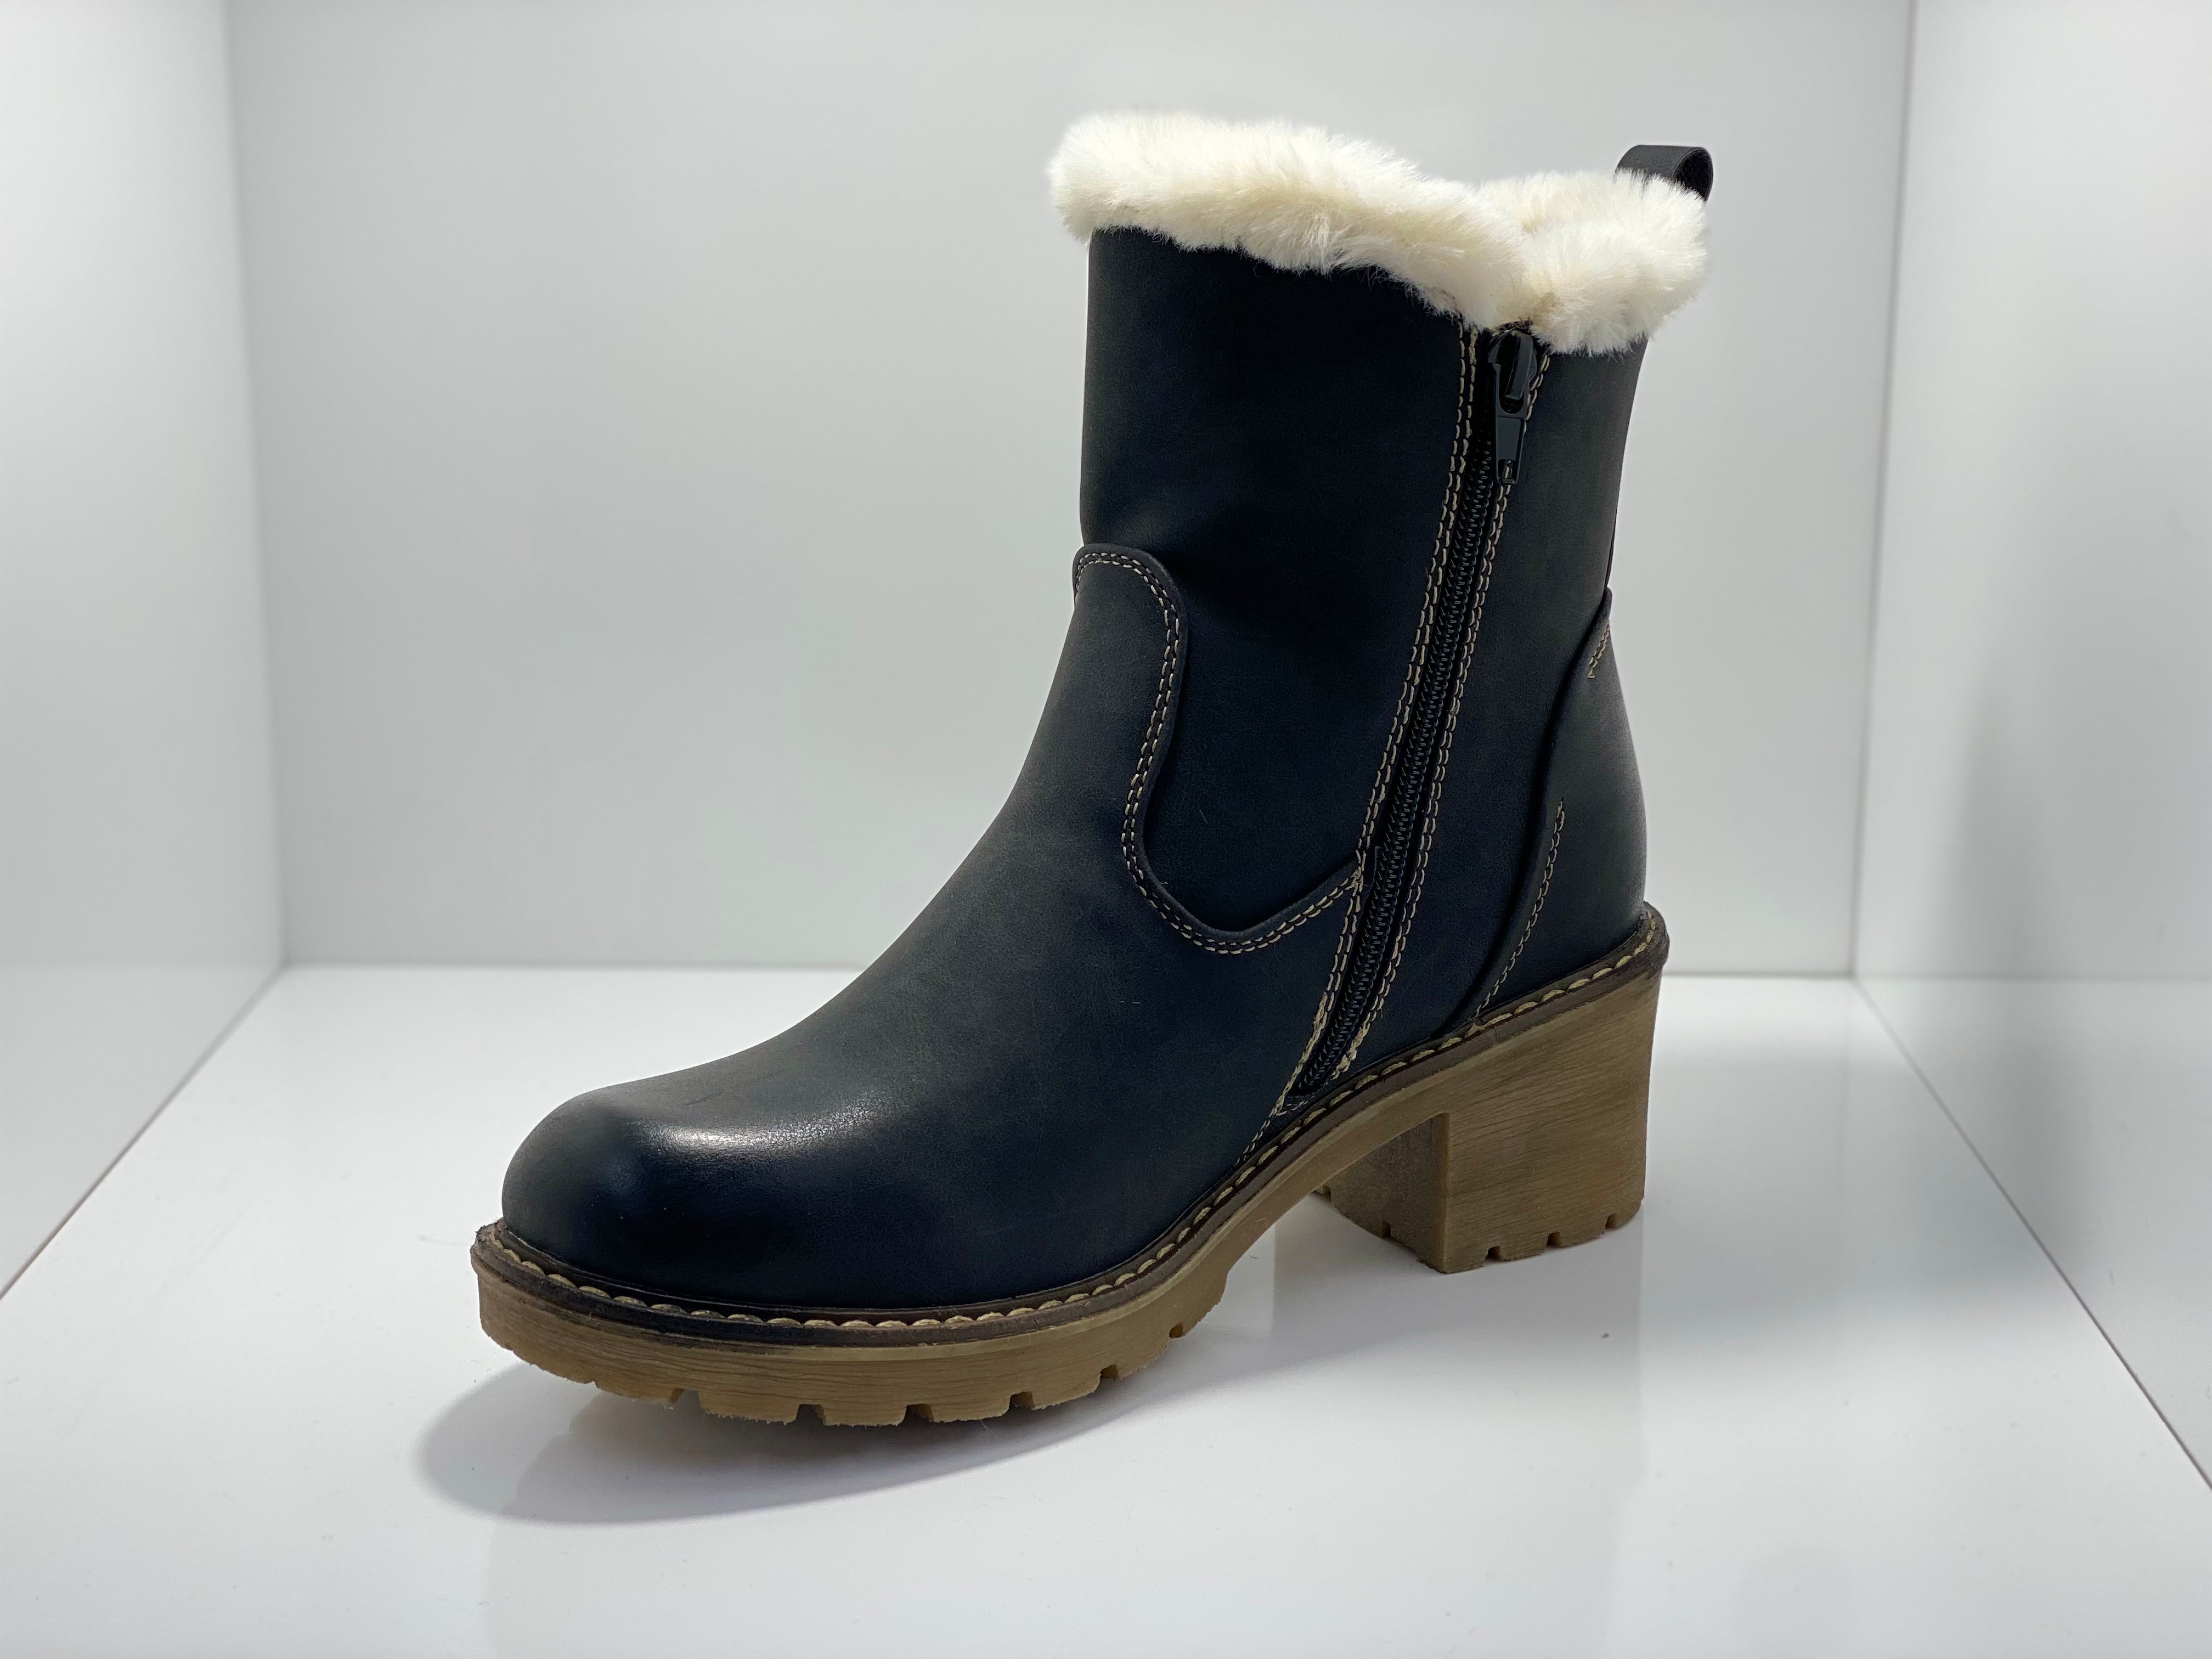 Elin Fur Lined Cleated Sole Boot